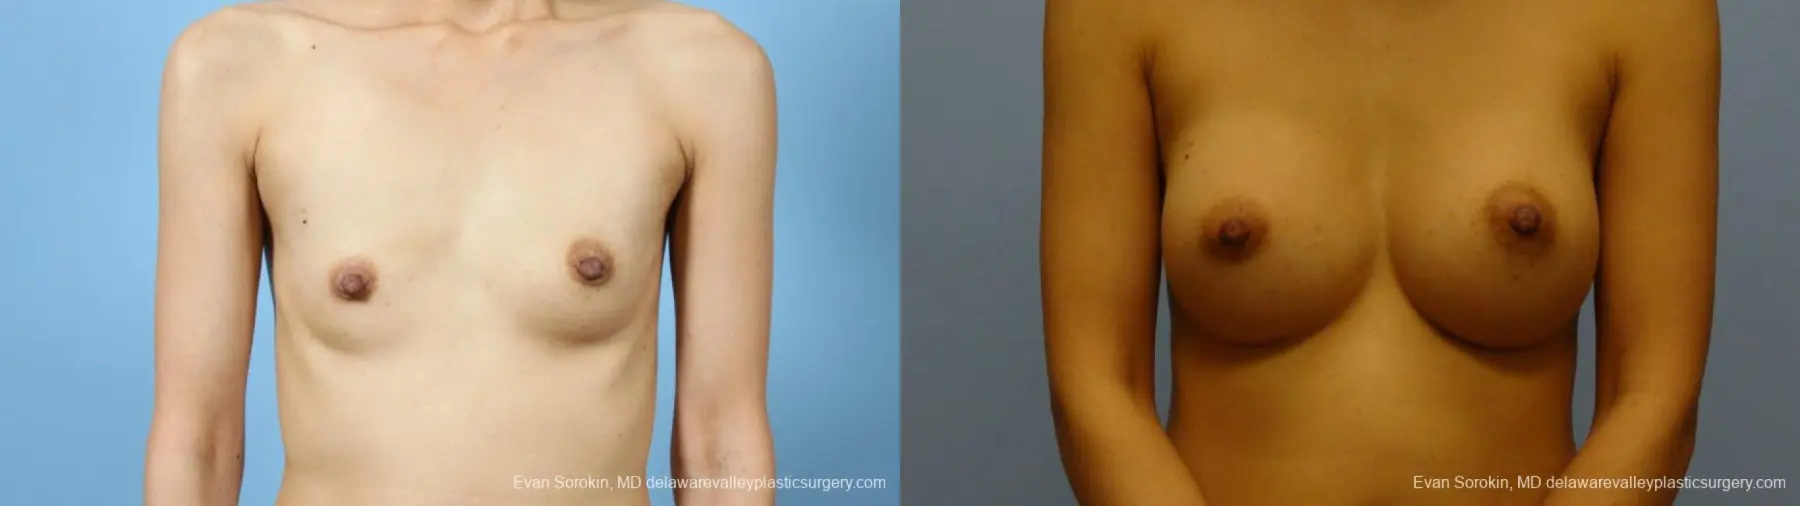 Philadelphia Breast Augmentation 9291 - Before and After 1